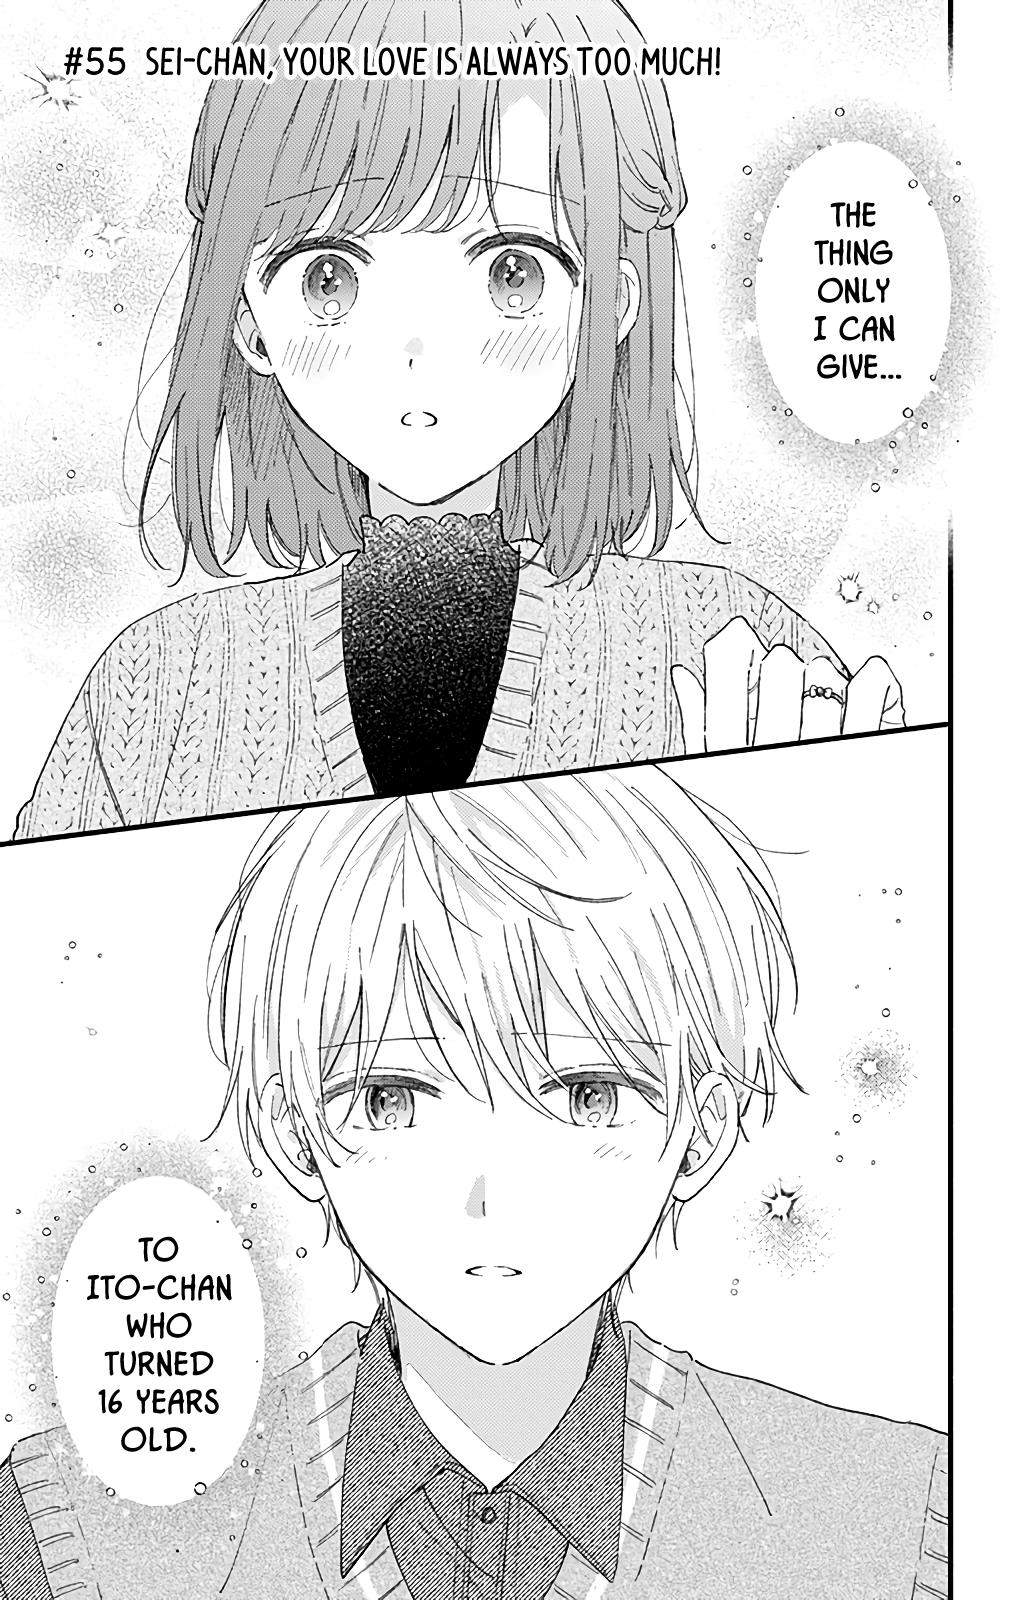 Sei-Chan, Your Love Is Too Much! Vol.15 Chapter 55: Sei-Chan, Your Love Is Always Too Much! - Picture 1